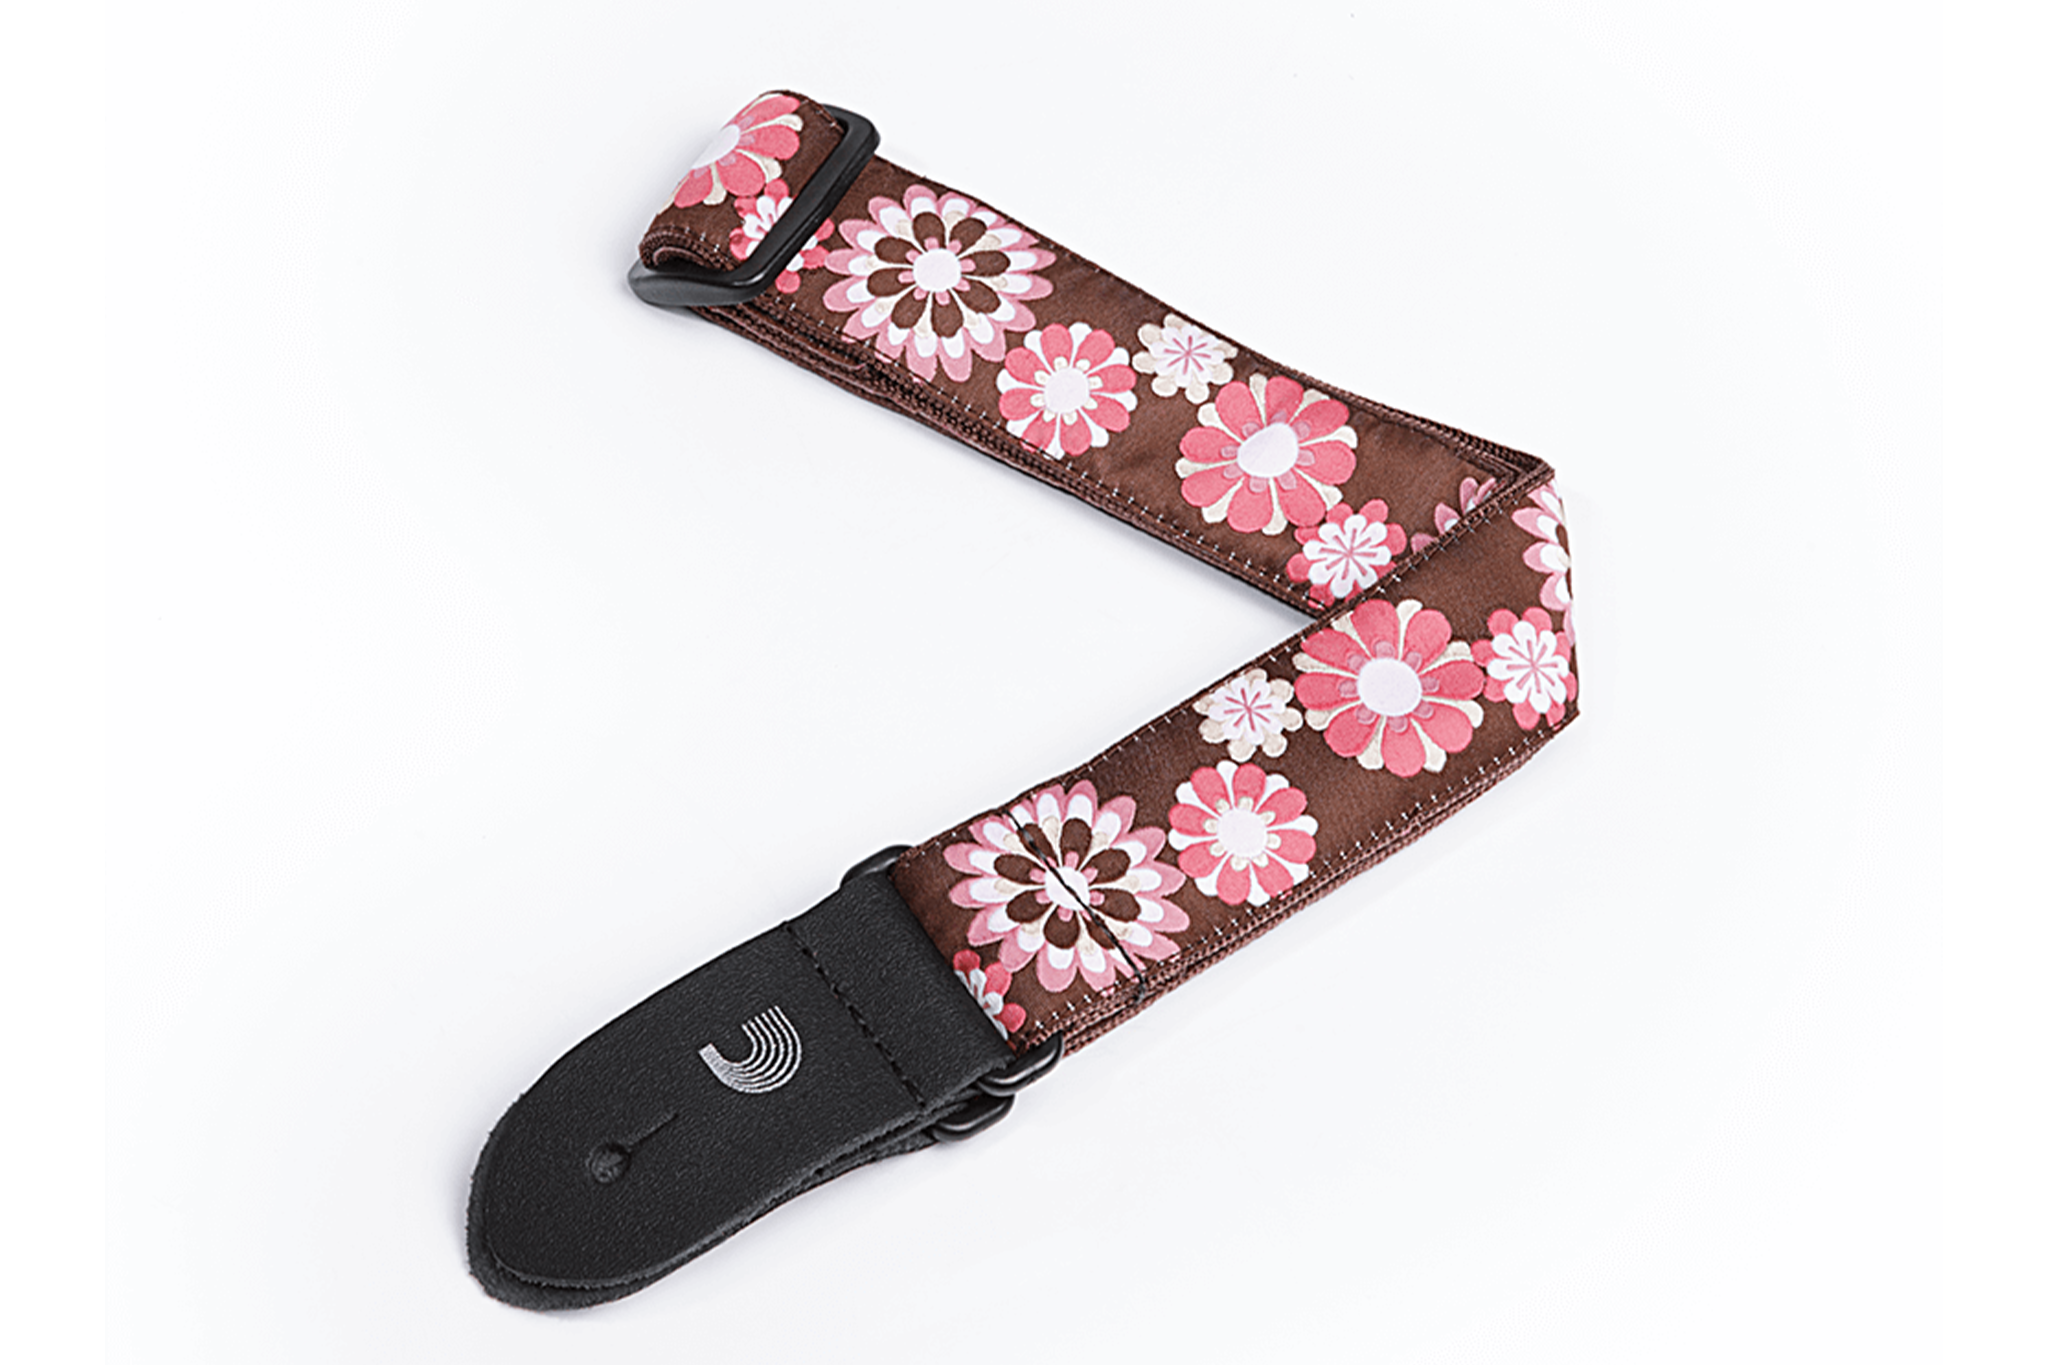 D'Addario Ukulele Strap Woven WHITE, BROWN and PINK Flowers 1-1/2 Inch